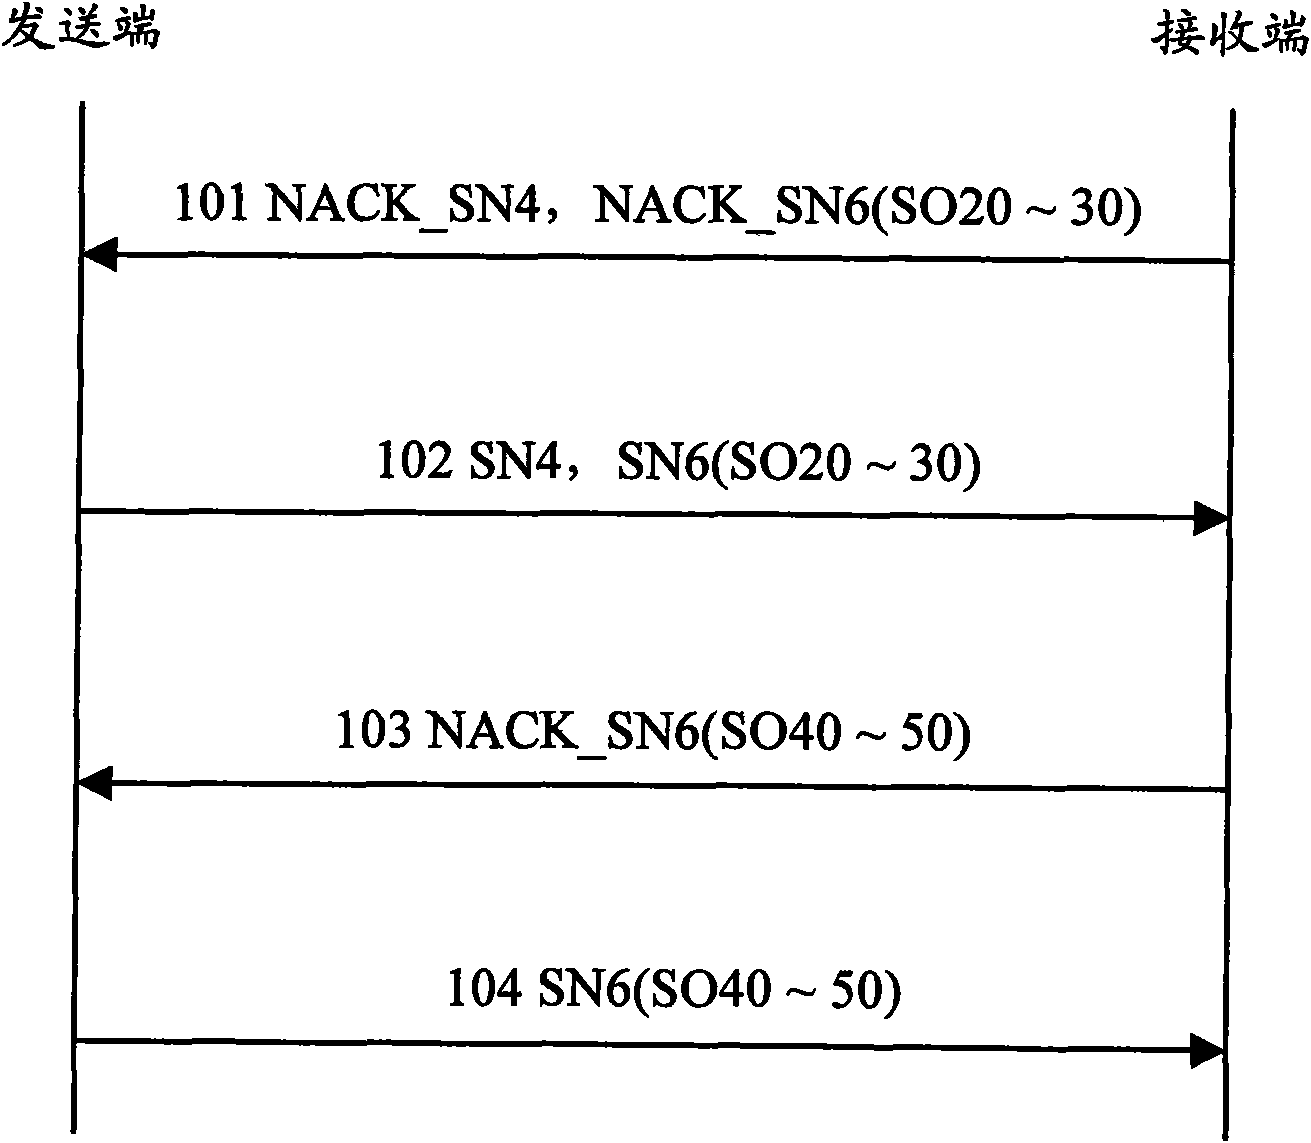 Quick-retransmission method and method in wireless chain control layer determination mode